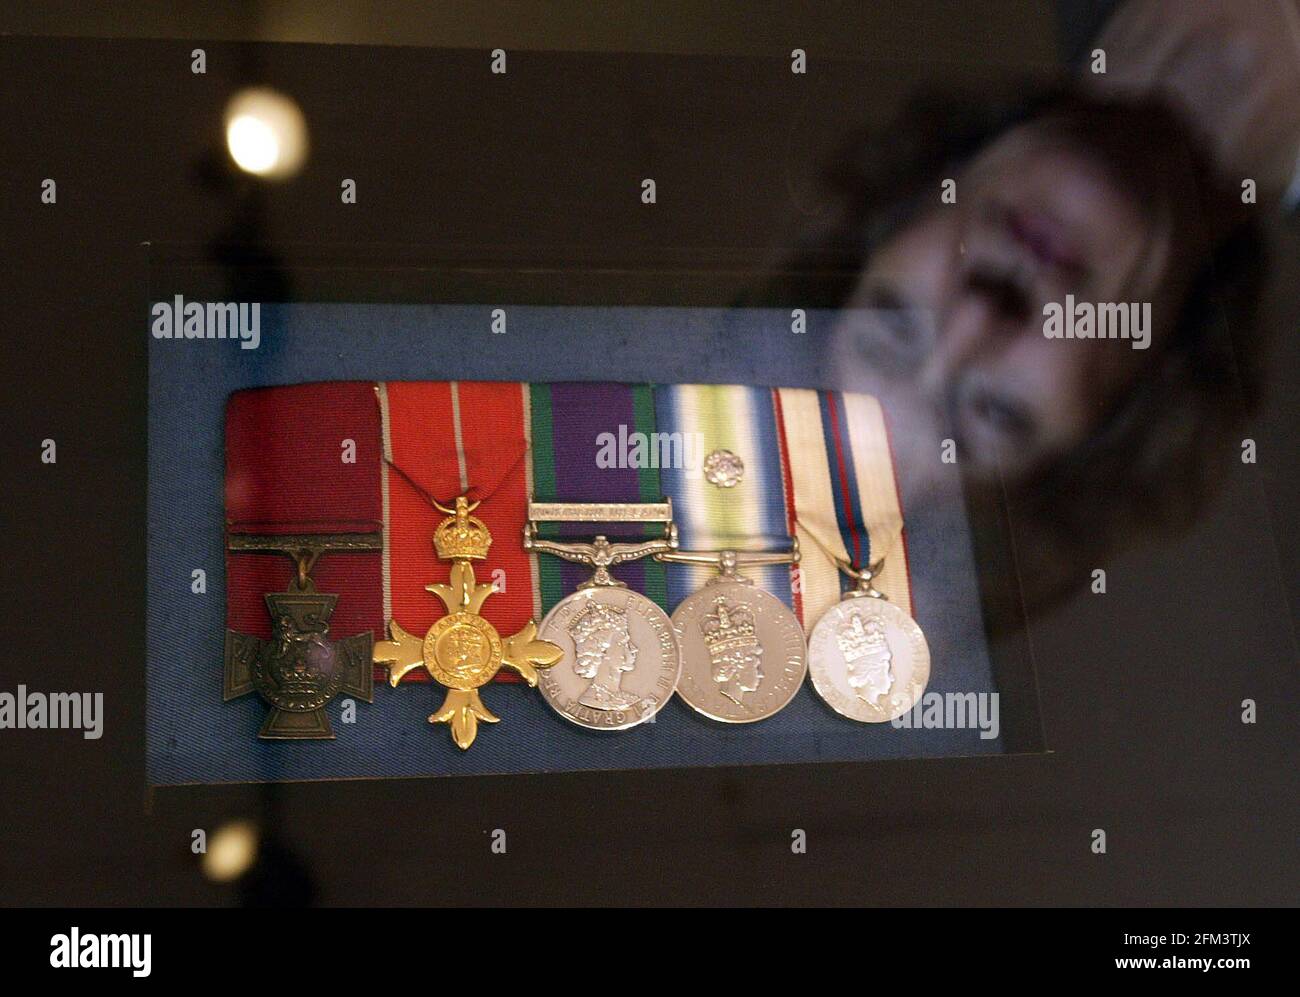 A new exhibition marking the 25th anniversary of the Falklands War includes the Victoria Cross awarded to H Jones. his wife Sara Jones (reflected in glass case) was at the National Army Museum to view the exhibition which runs from 2April to September 2007.  pic David Sandison Stock Photo